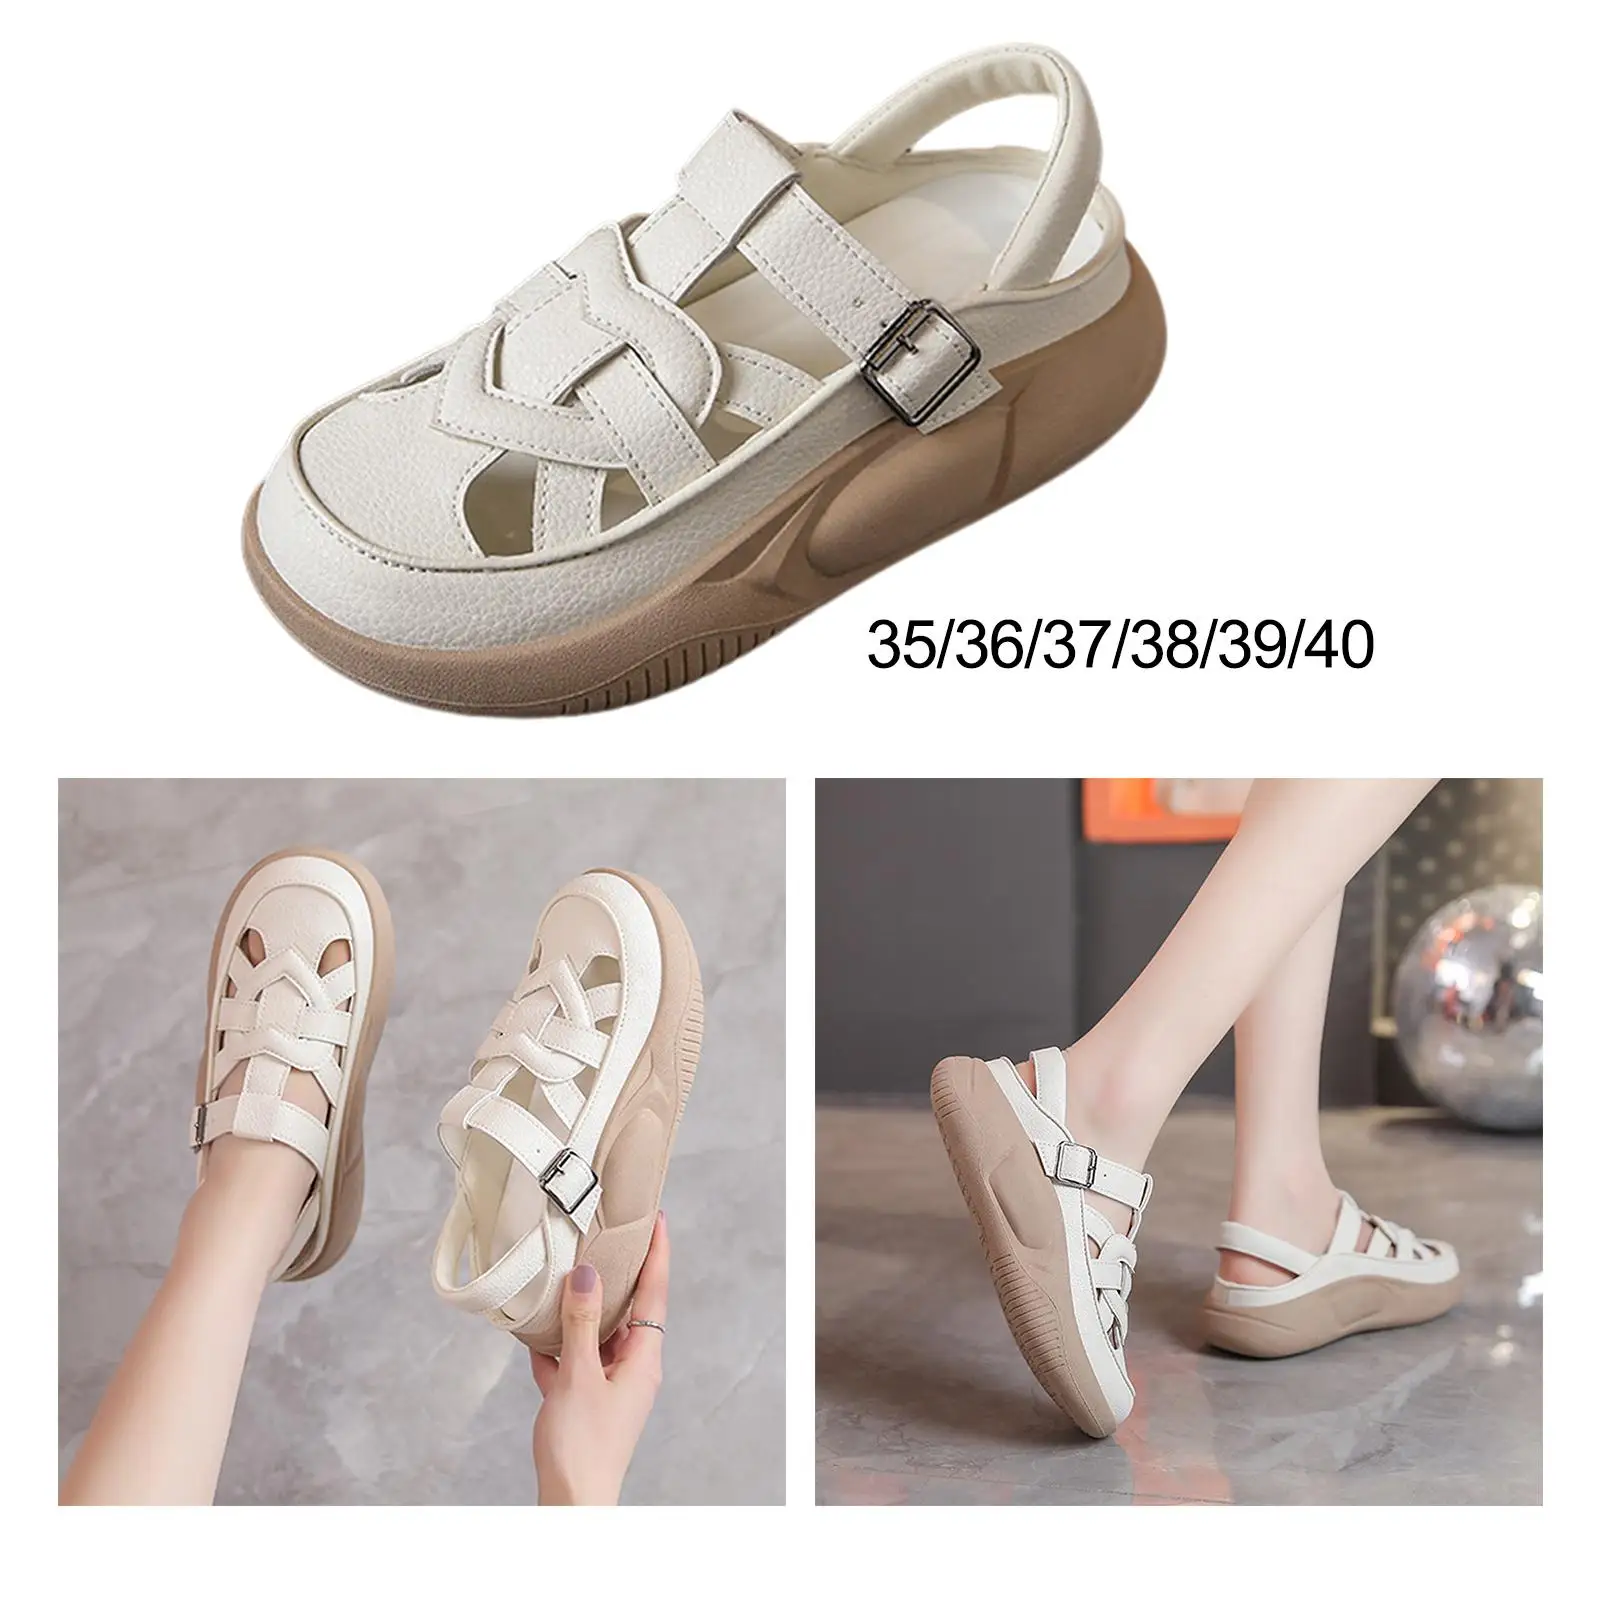 Women`s Summer Sandals Trendy Soft Closed Toe Casual Platform Sandals Slip on Sandals for Dating Beach Travel Activities